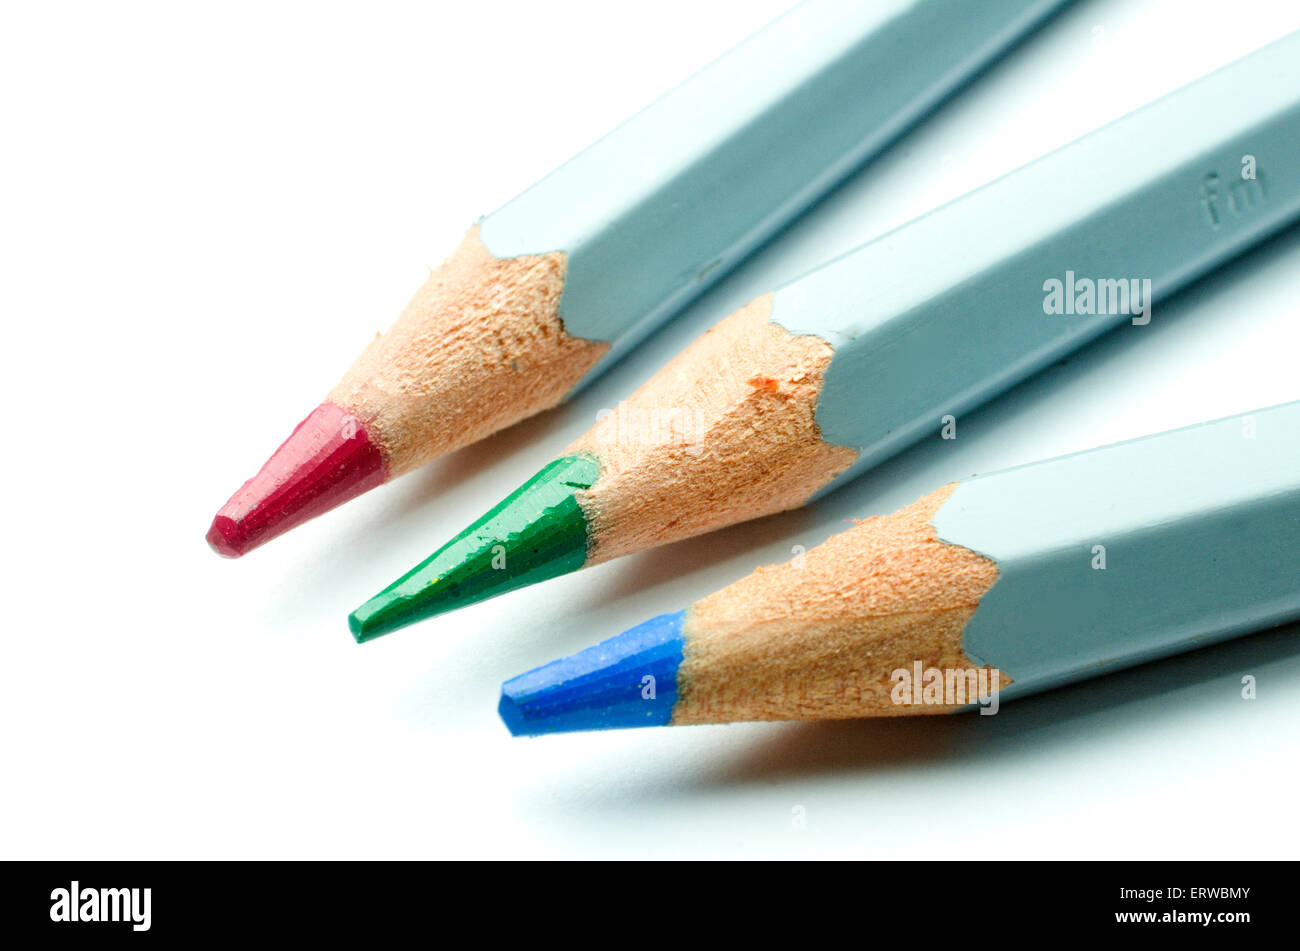 Red, Green and Blue pencil crayons close up on white background. Stock Photo